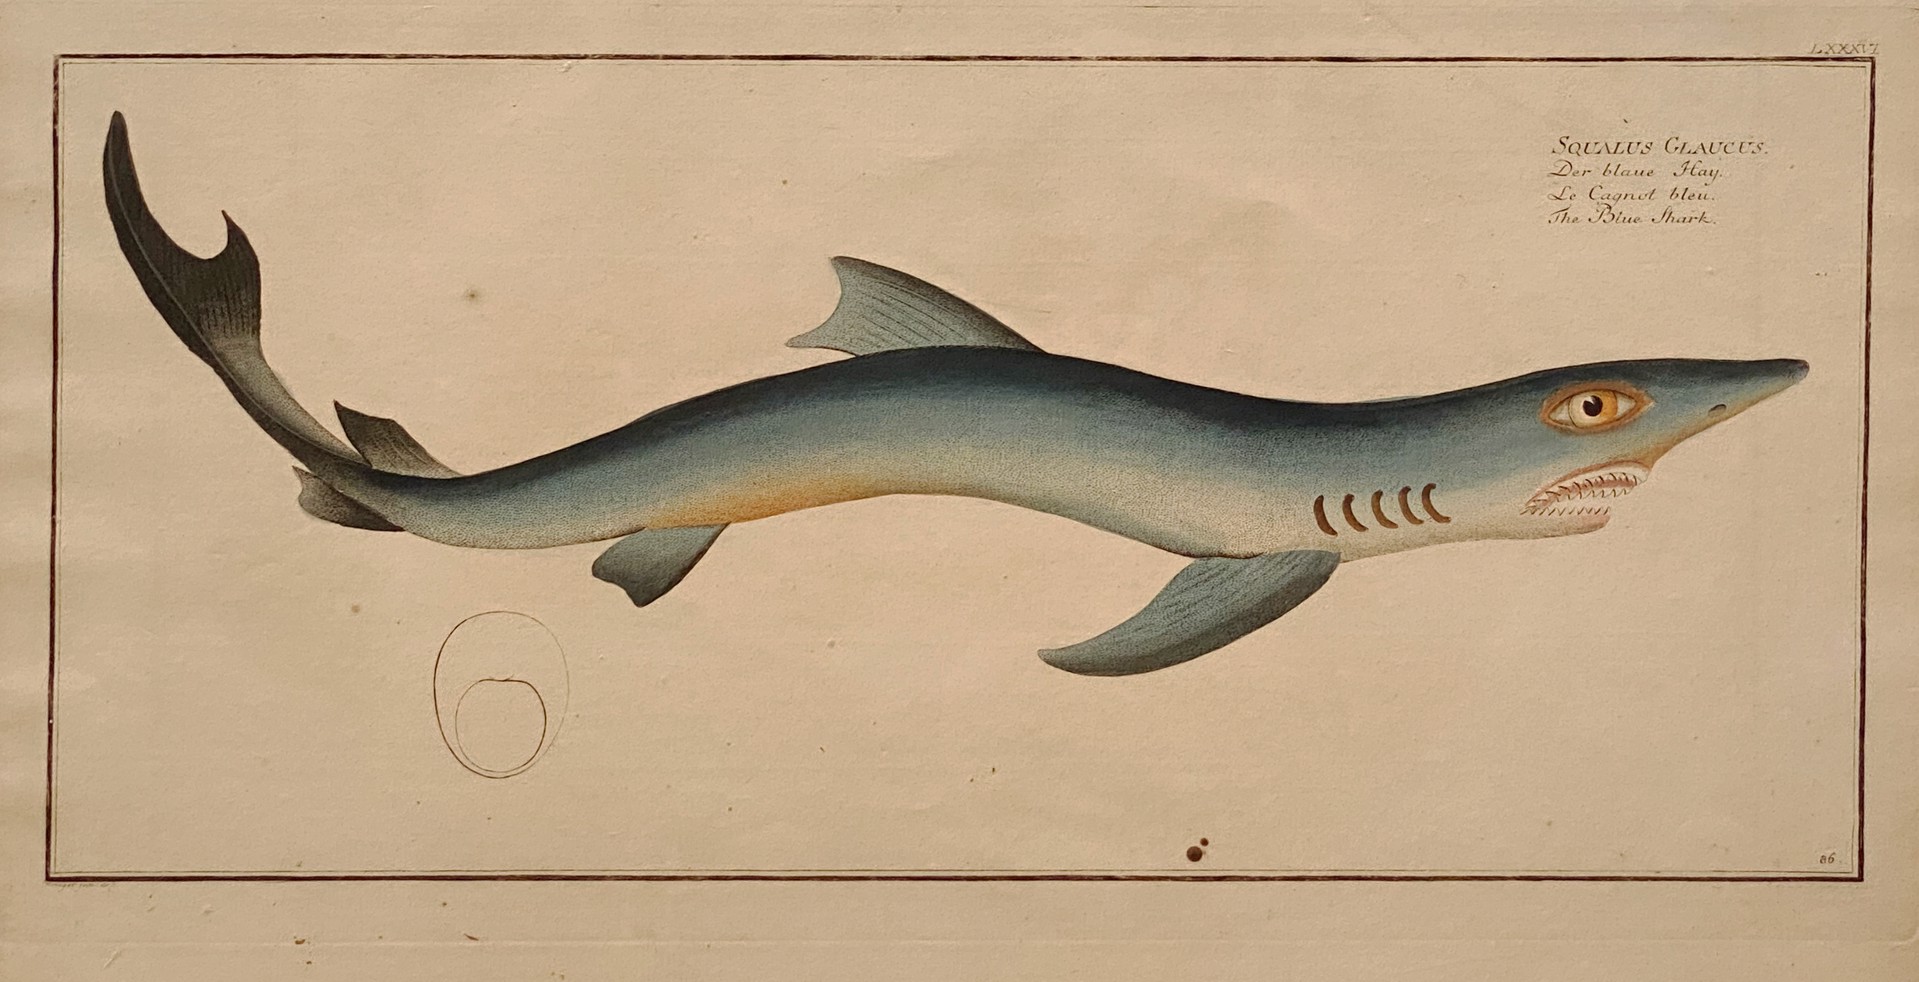 The Blue Shark, Squalus Glaucus from Itchyologie ou Histoire Naturelle, 1785 - 97 by Marcus Bloch